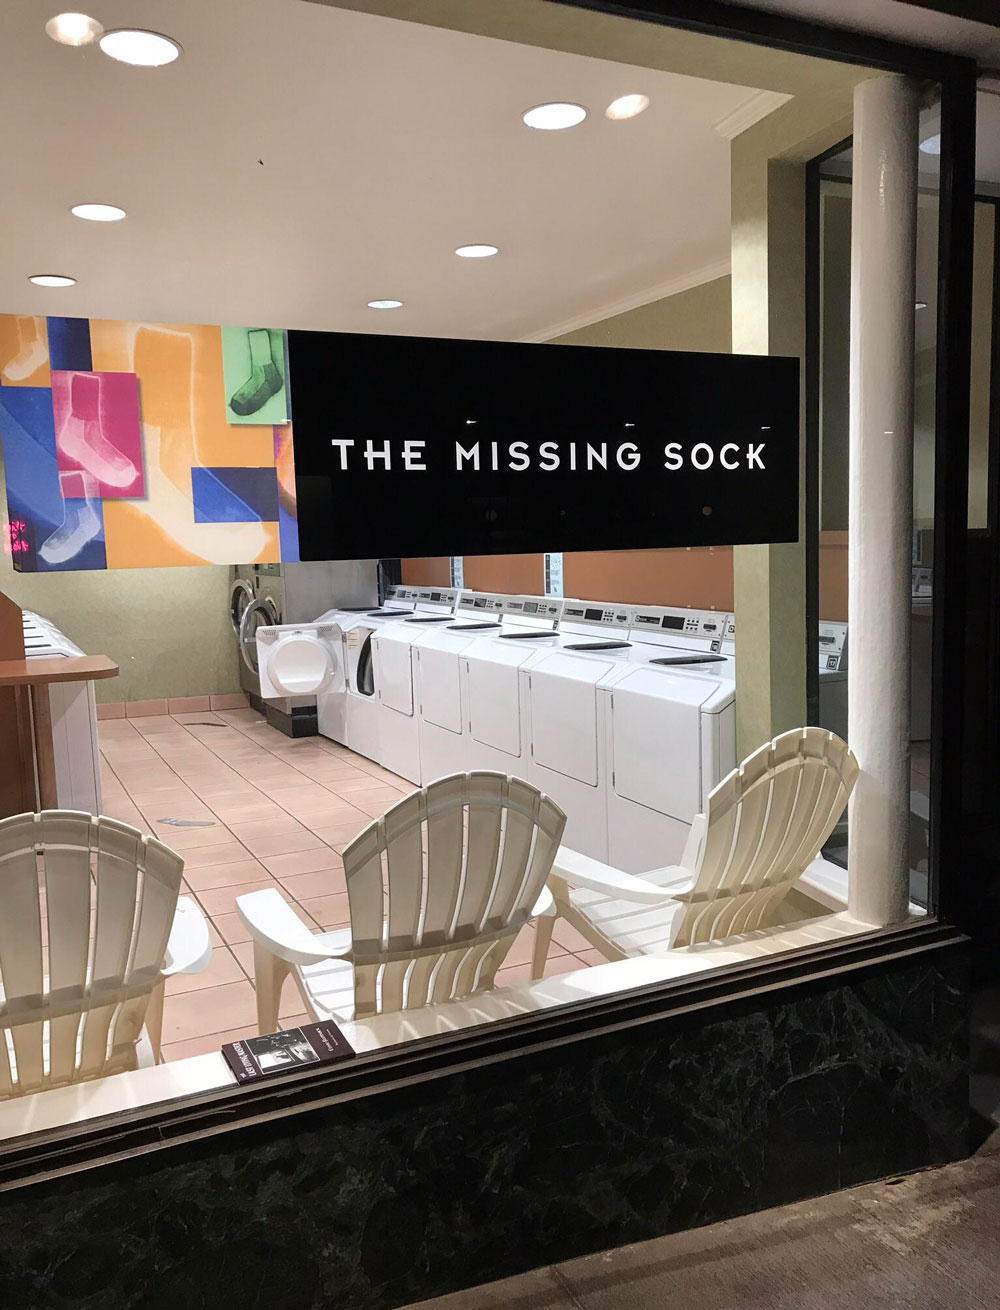 The name of this laundromat in SF